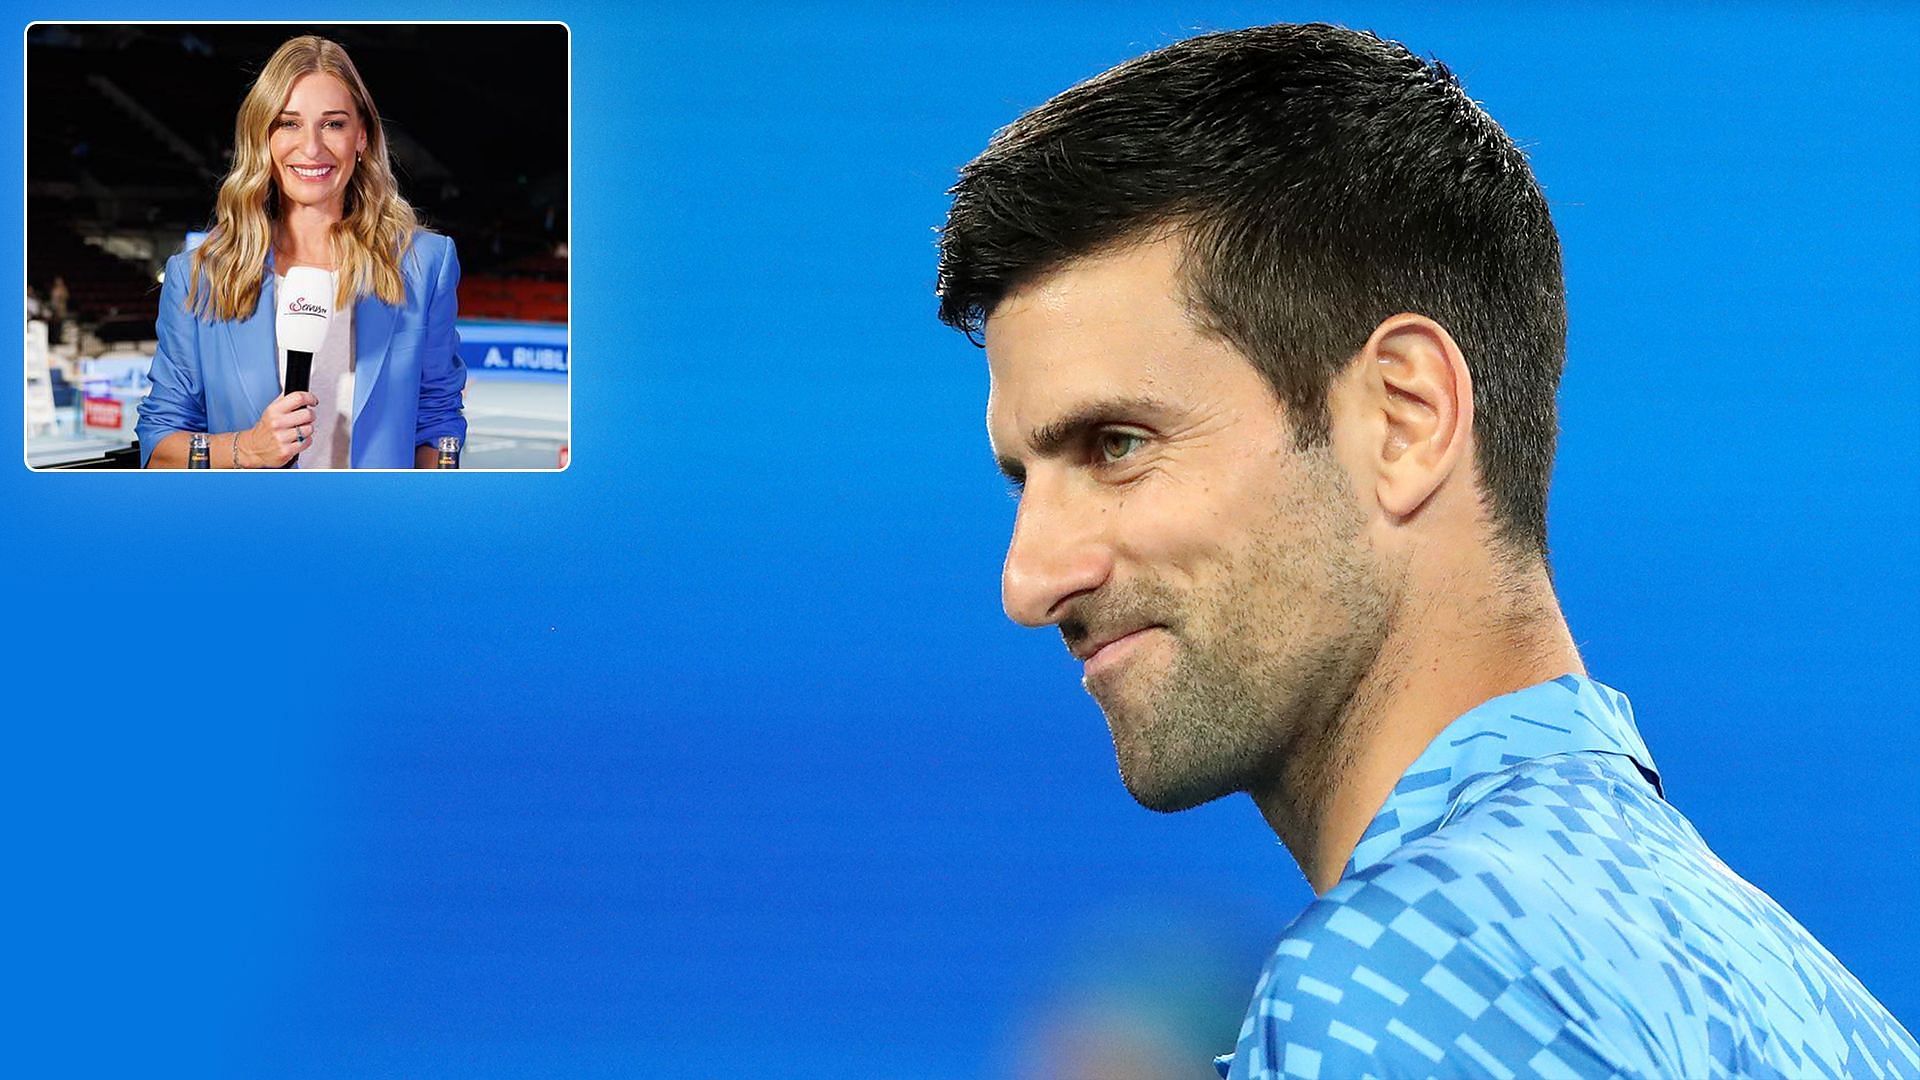 Novak Djokovic is into the Australian Open second round for the 16th straight year.